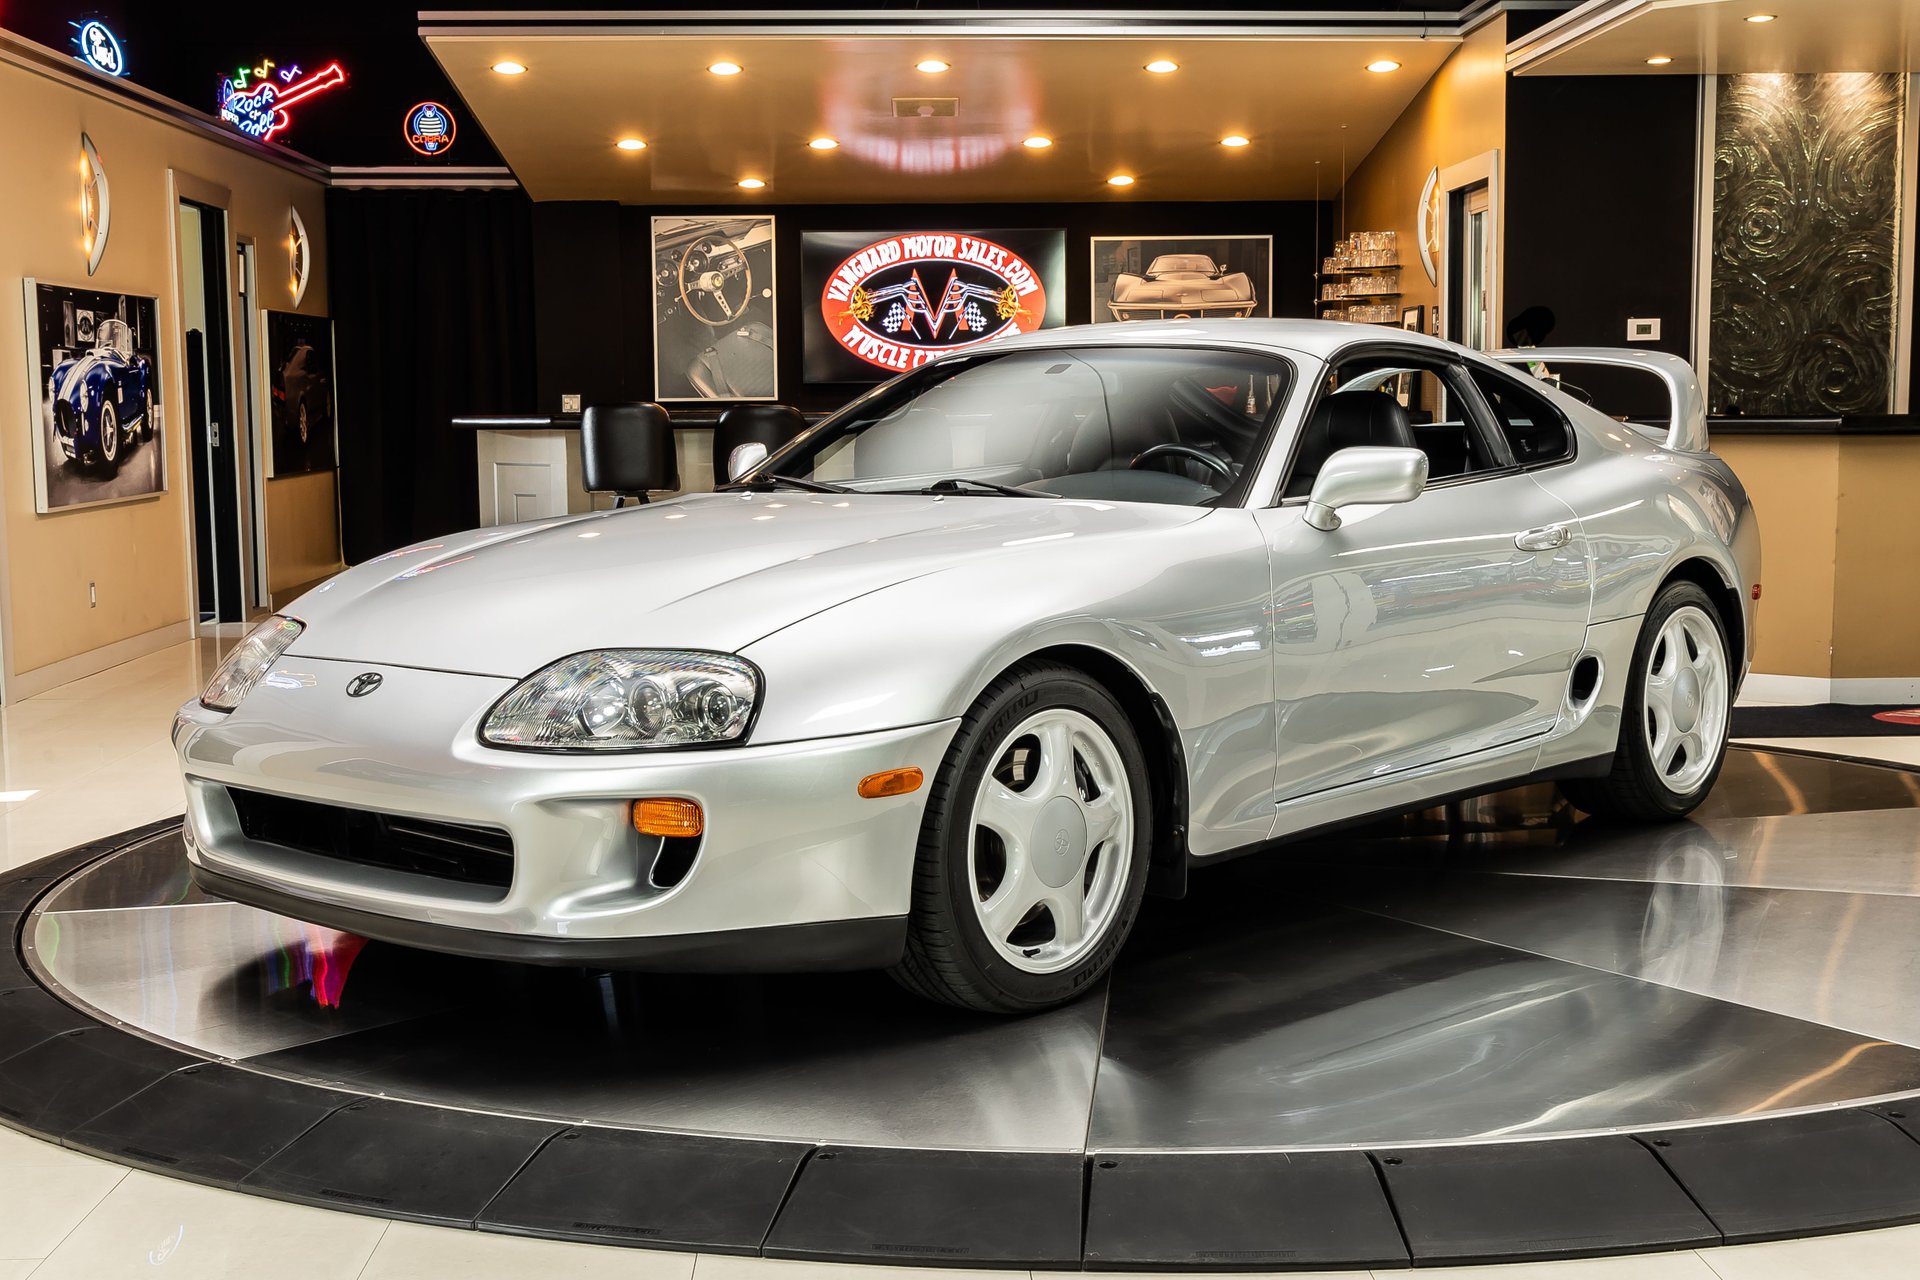 1995 Toyota Supra | Classic Cars for Sale Michigan: Muscle & Old Cars |  Vanguard Motor Sales